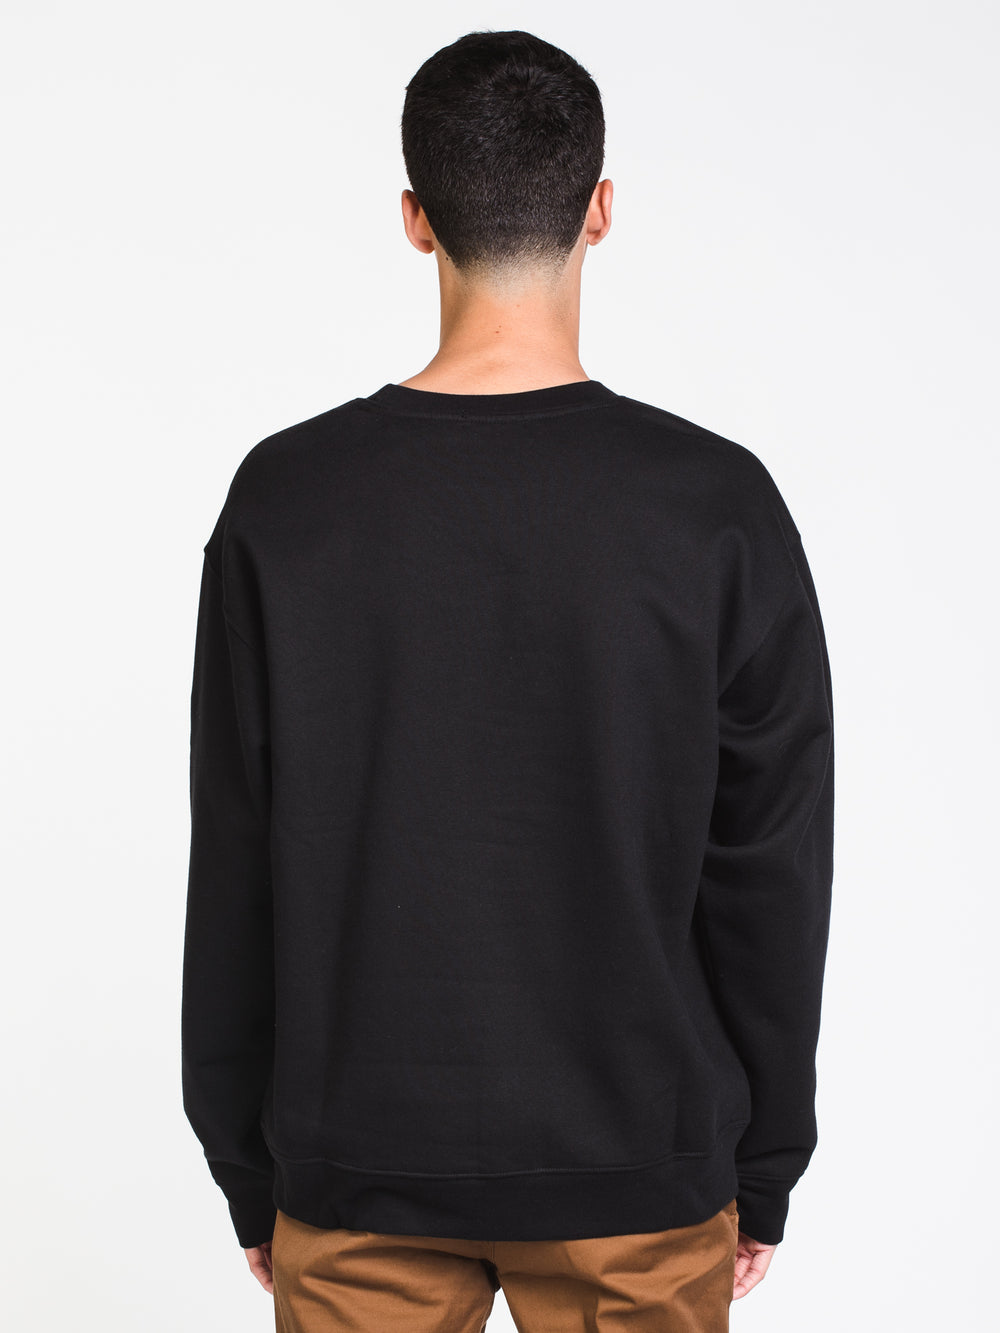 MENS MELODY CREW - BLACK - CLEARANCE